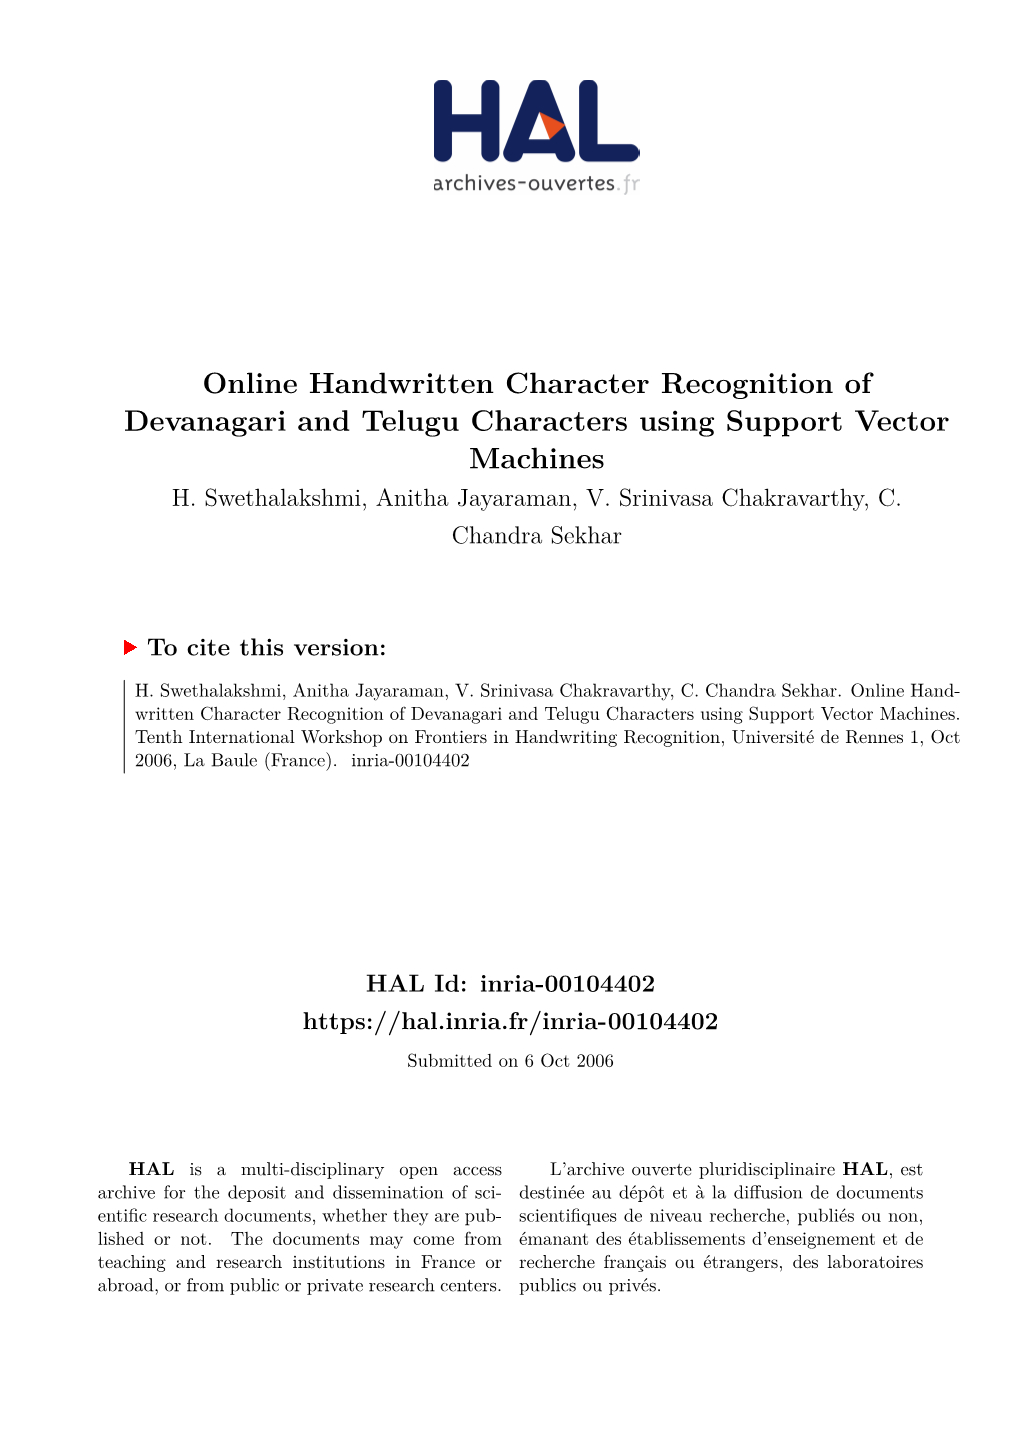 Online Handwritten Character Recognition of Devanagari and Telugu Characters Using Support Vector Machines H